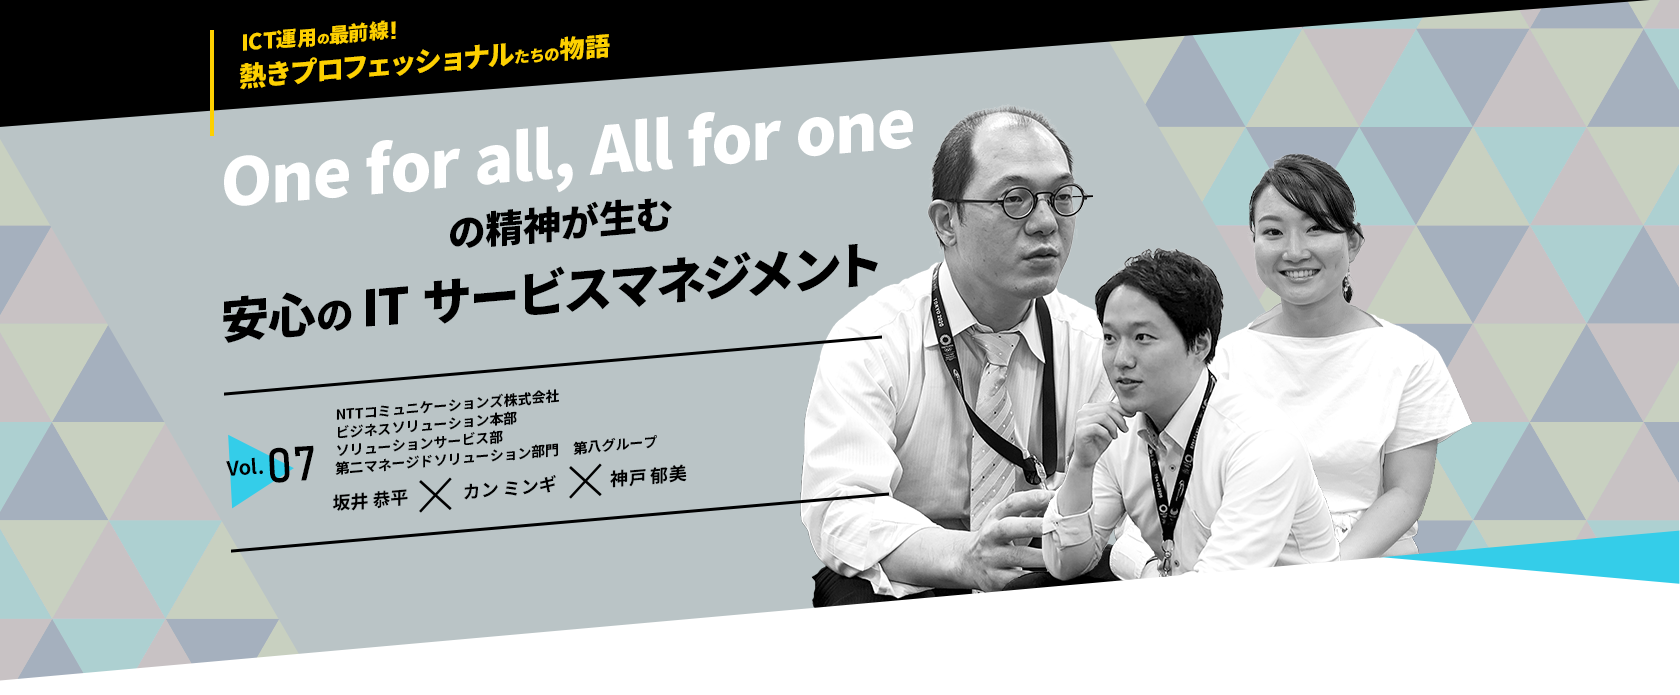 One for all, All for oneの精神が生む安心のITサービスマネジメント